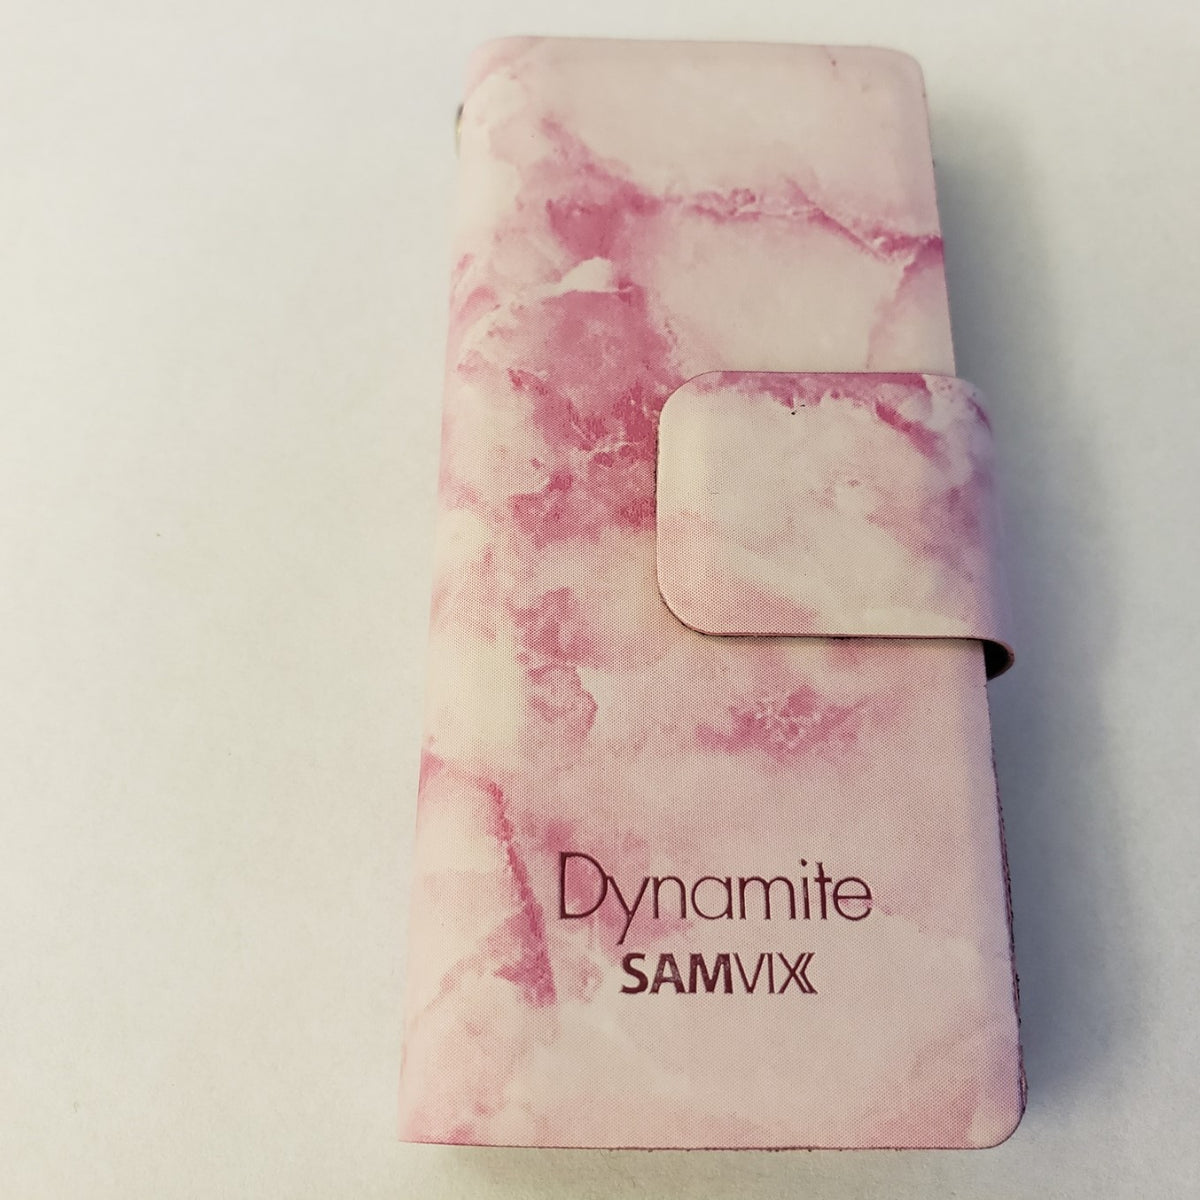 Samvix Dynamite Leather Protective Case, Tie Dye - Assorted Colors